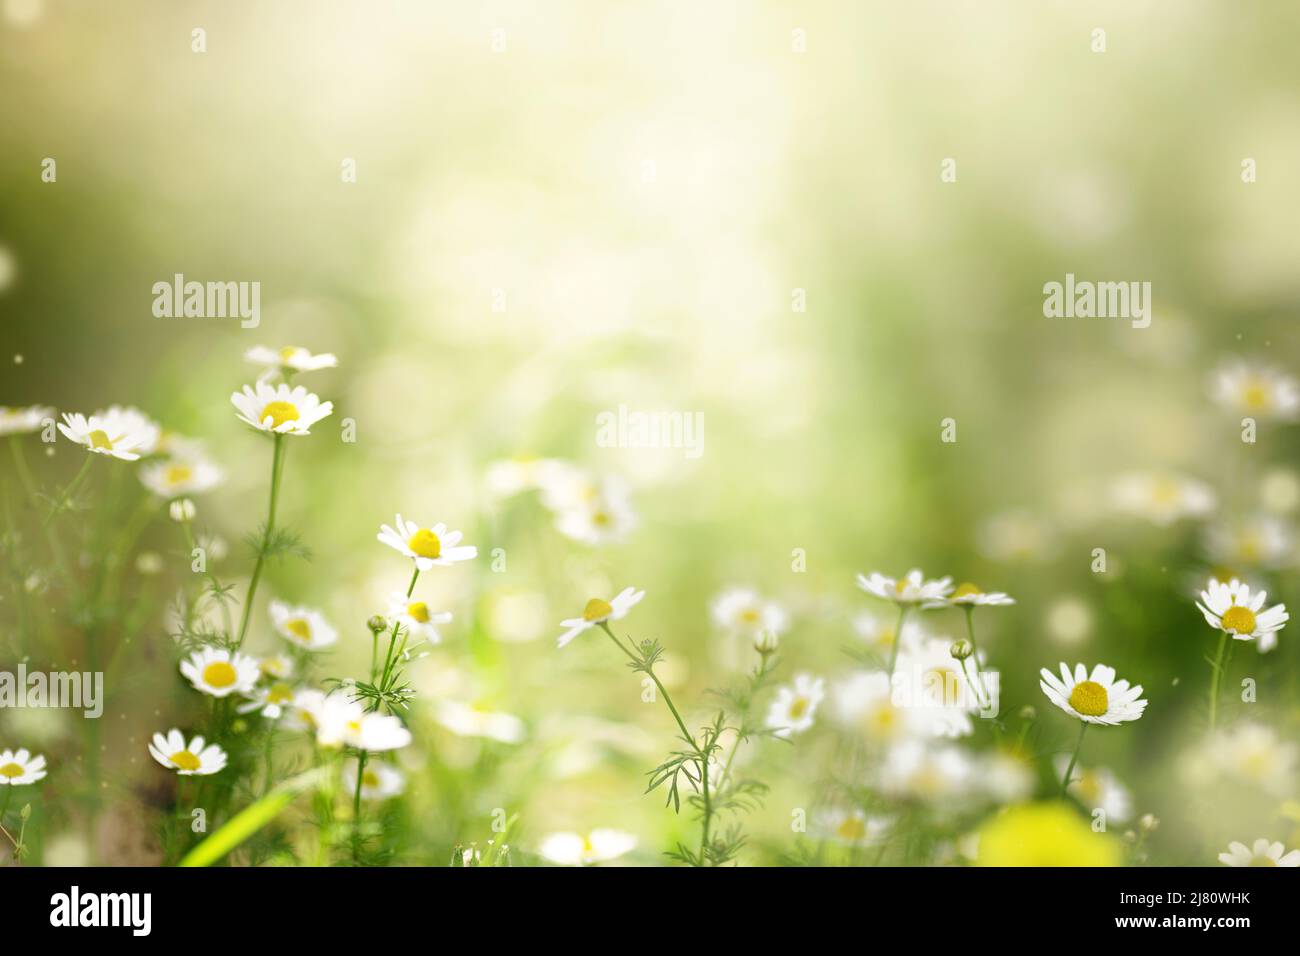 Chamomile or daisy white flower bush in full bloom on a background of green leaves and grass on the field on a summer day. banner. Stock Photo